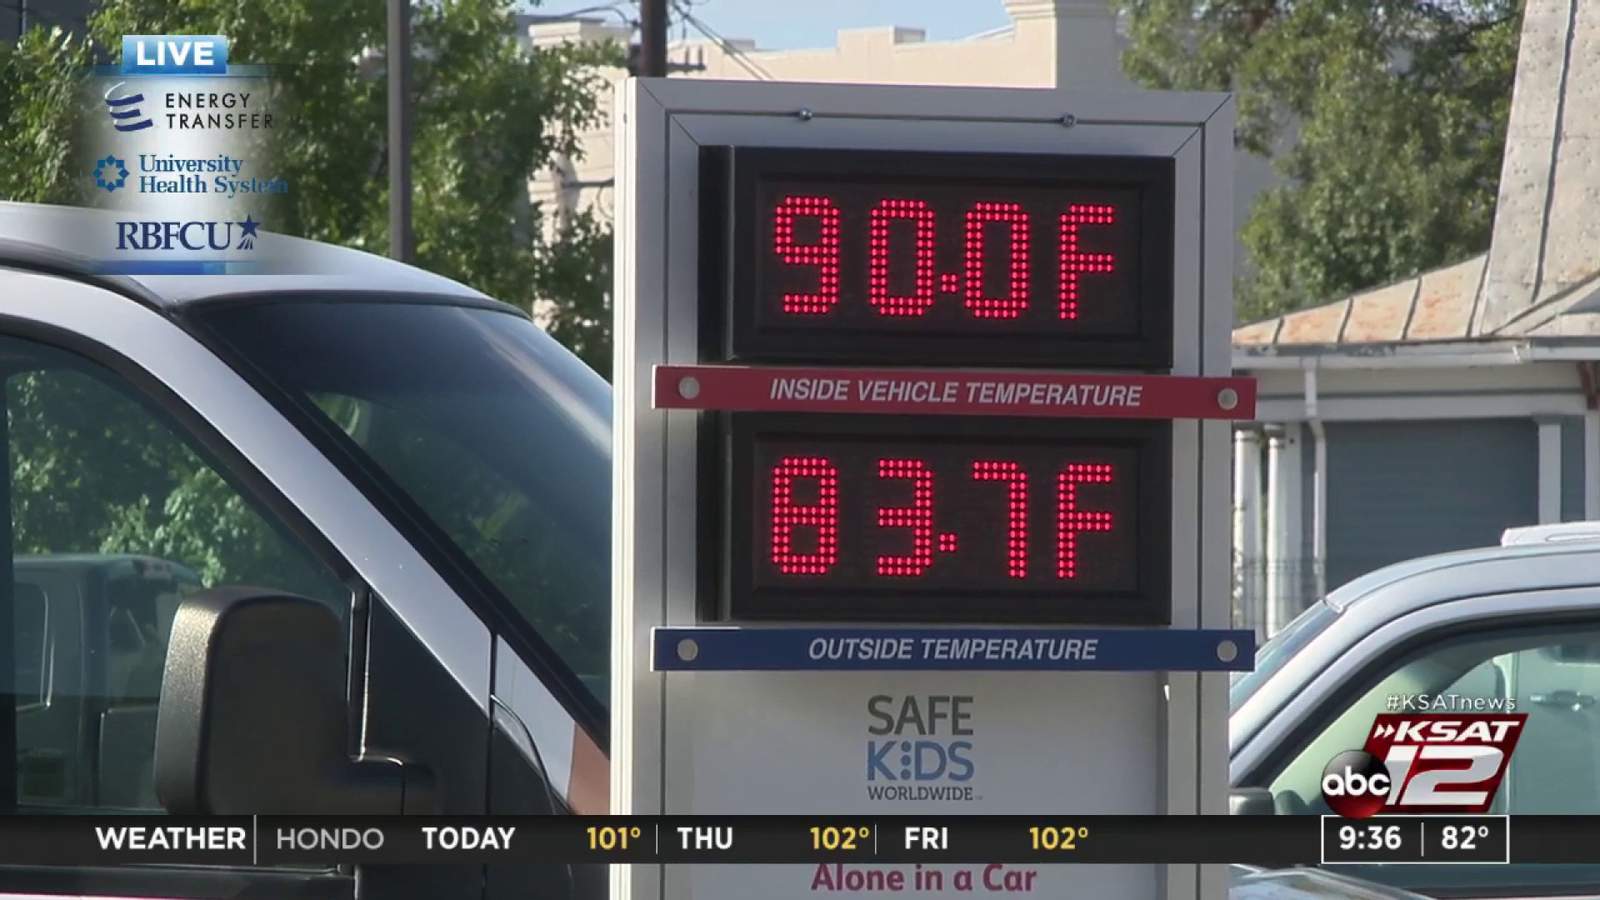 Heatstroke safety tips: Call 911 if you see a child or a pet in distress locked inside vehicle